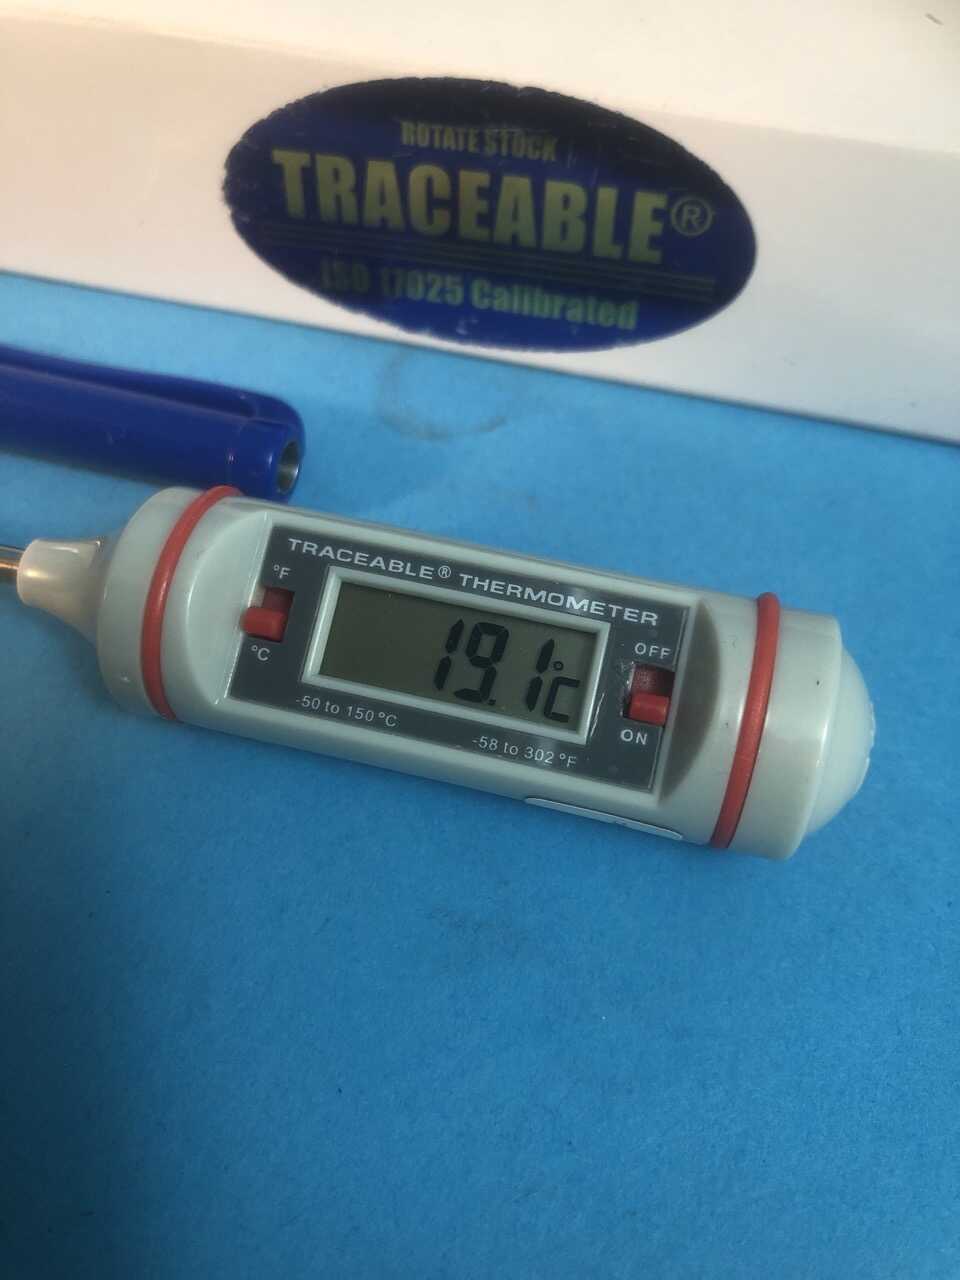 Traceable® Extra-Extra Long-Probe Waterproof Thermometer (Traceable)